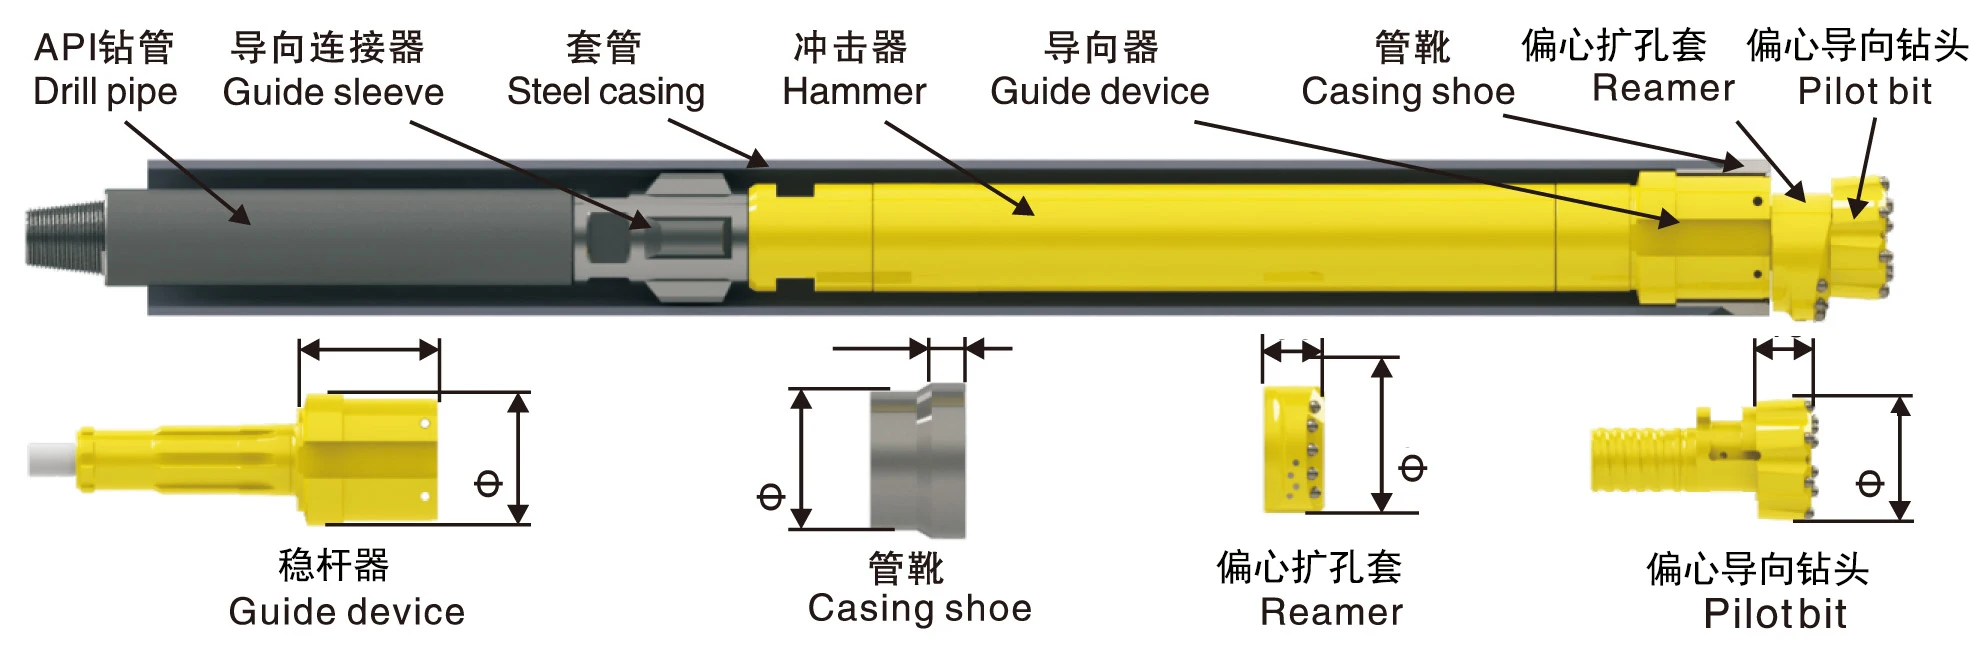 Symmetric Overburnden Casing Drilling Systems DTH Drill Bits Rock Drilling Tool